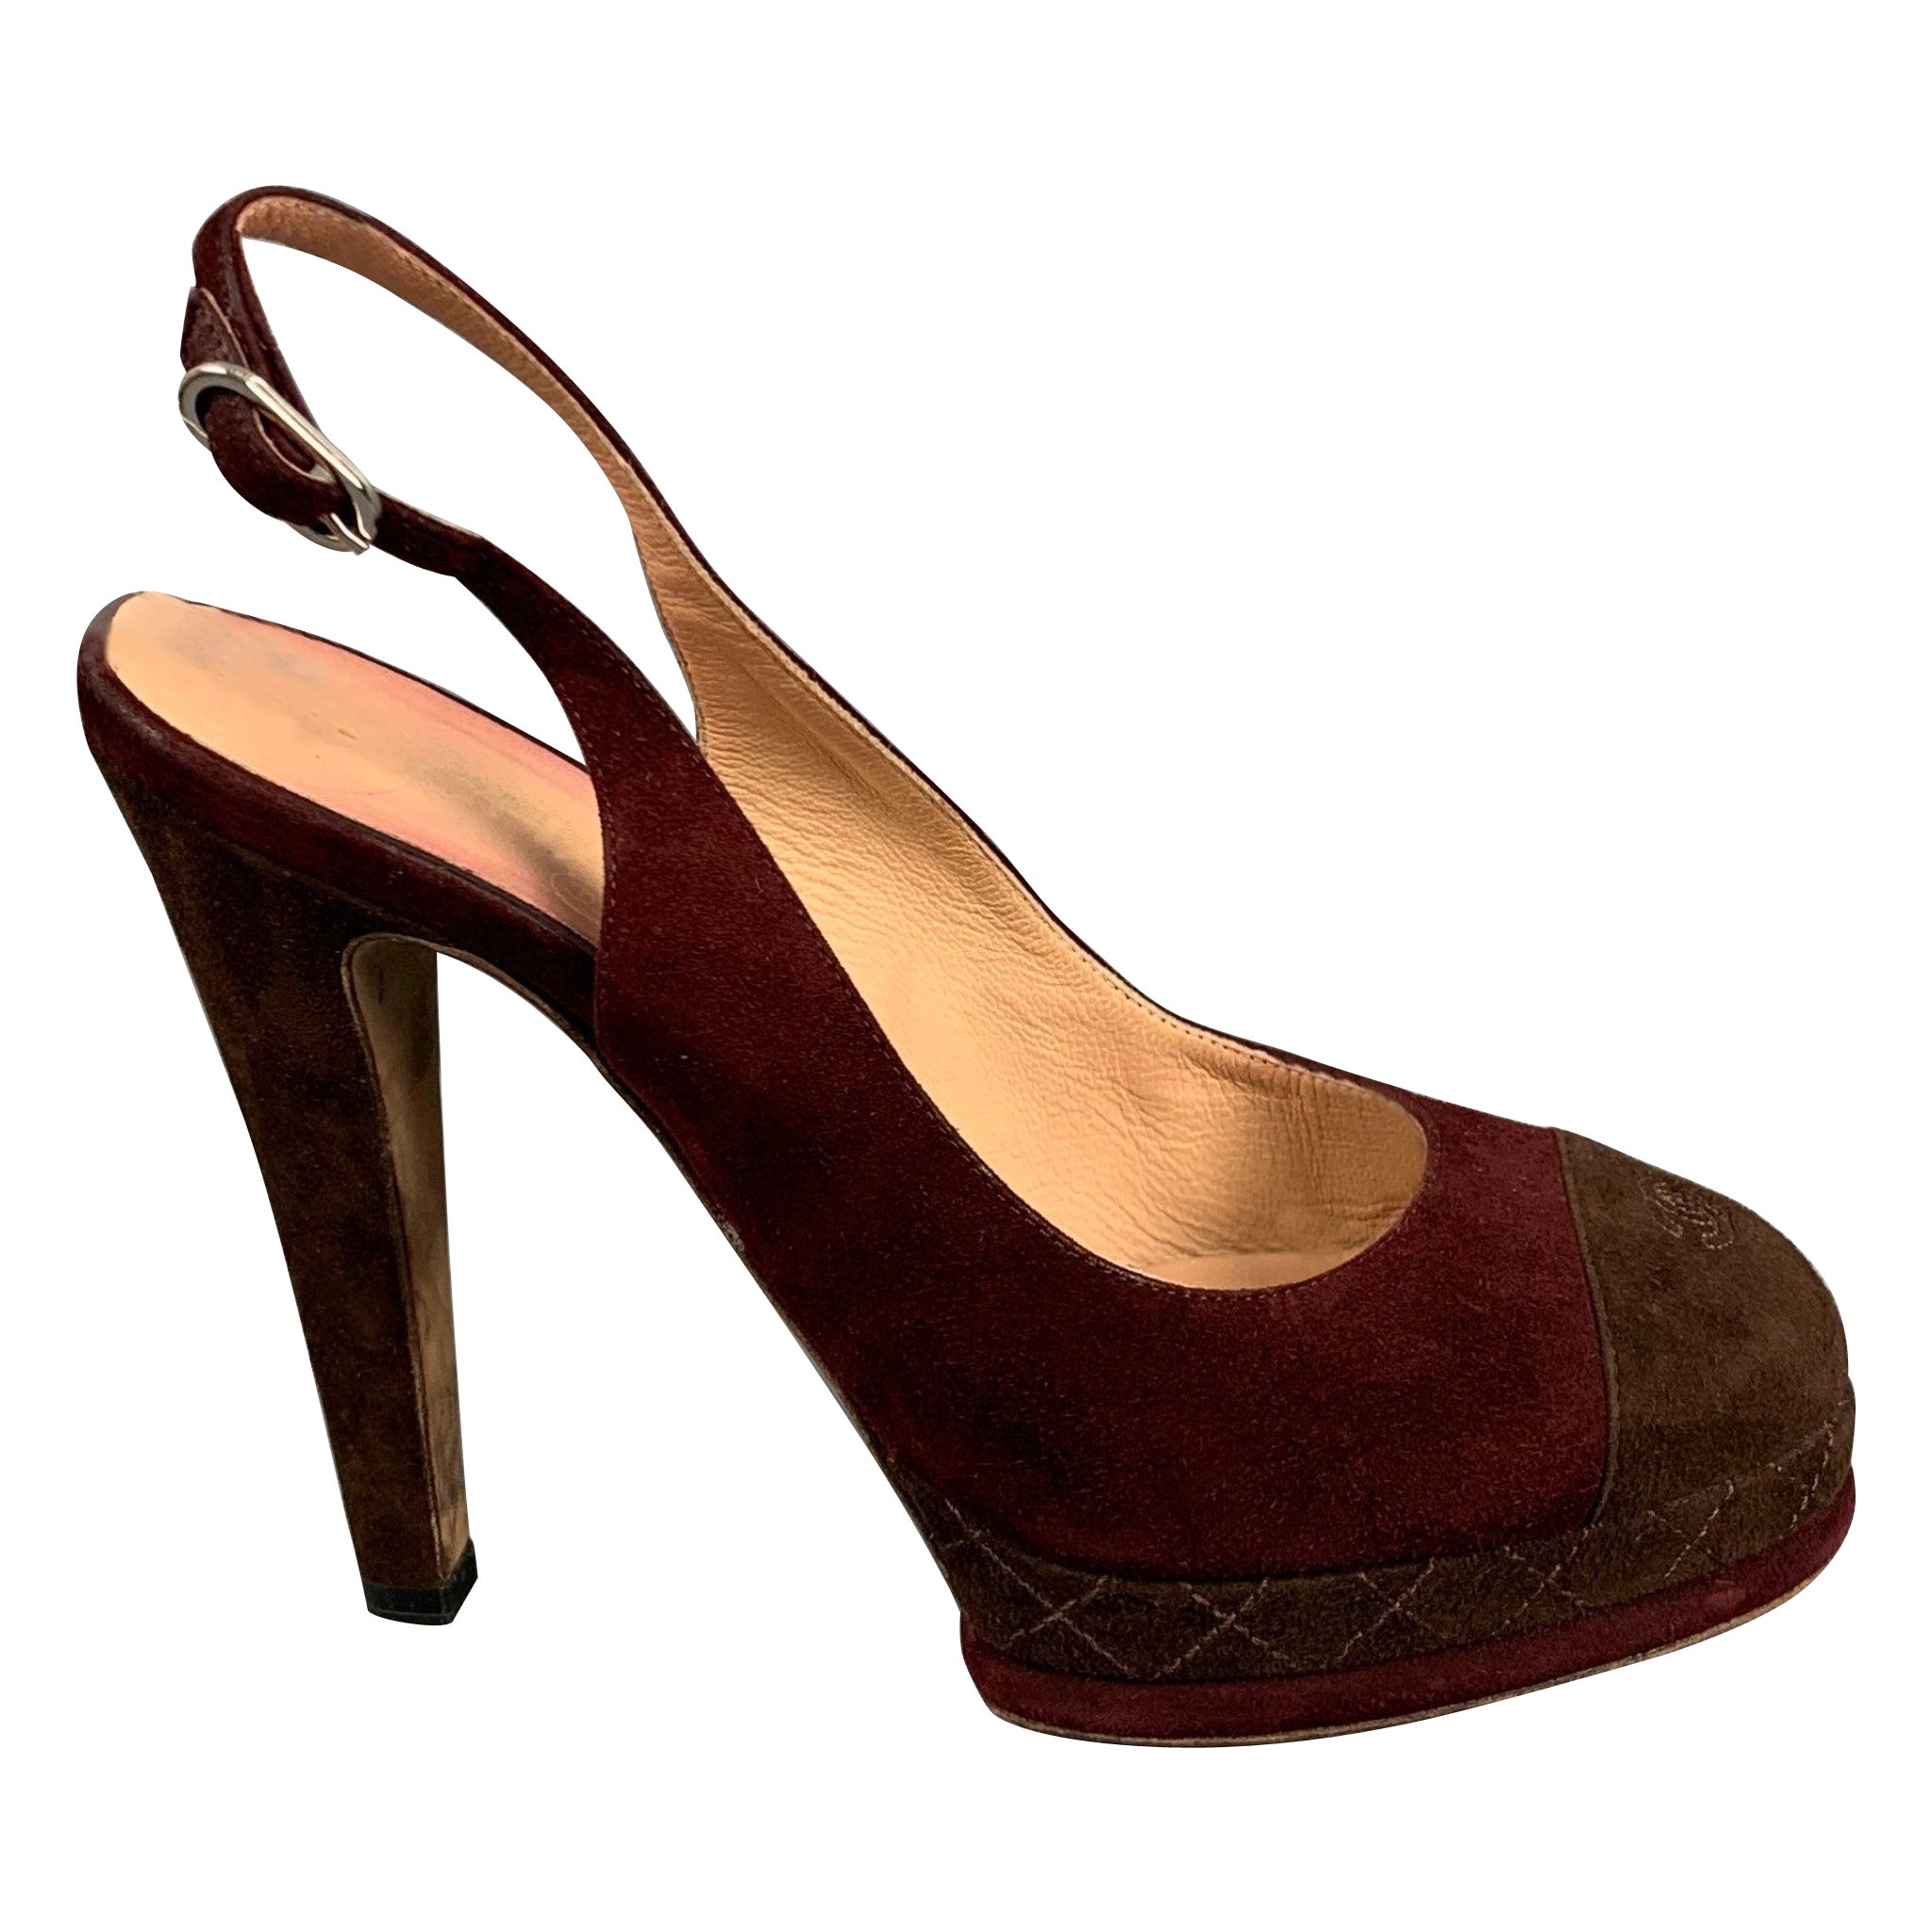 CHANEL Size 7.5 Burgundy Brown Suede Slingback Pumps For Sale